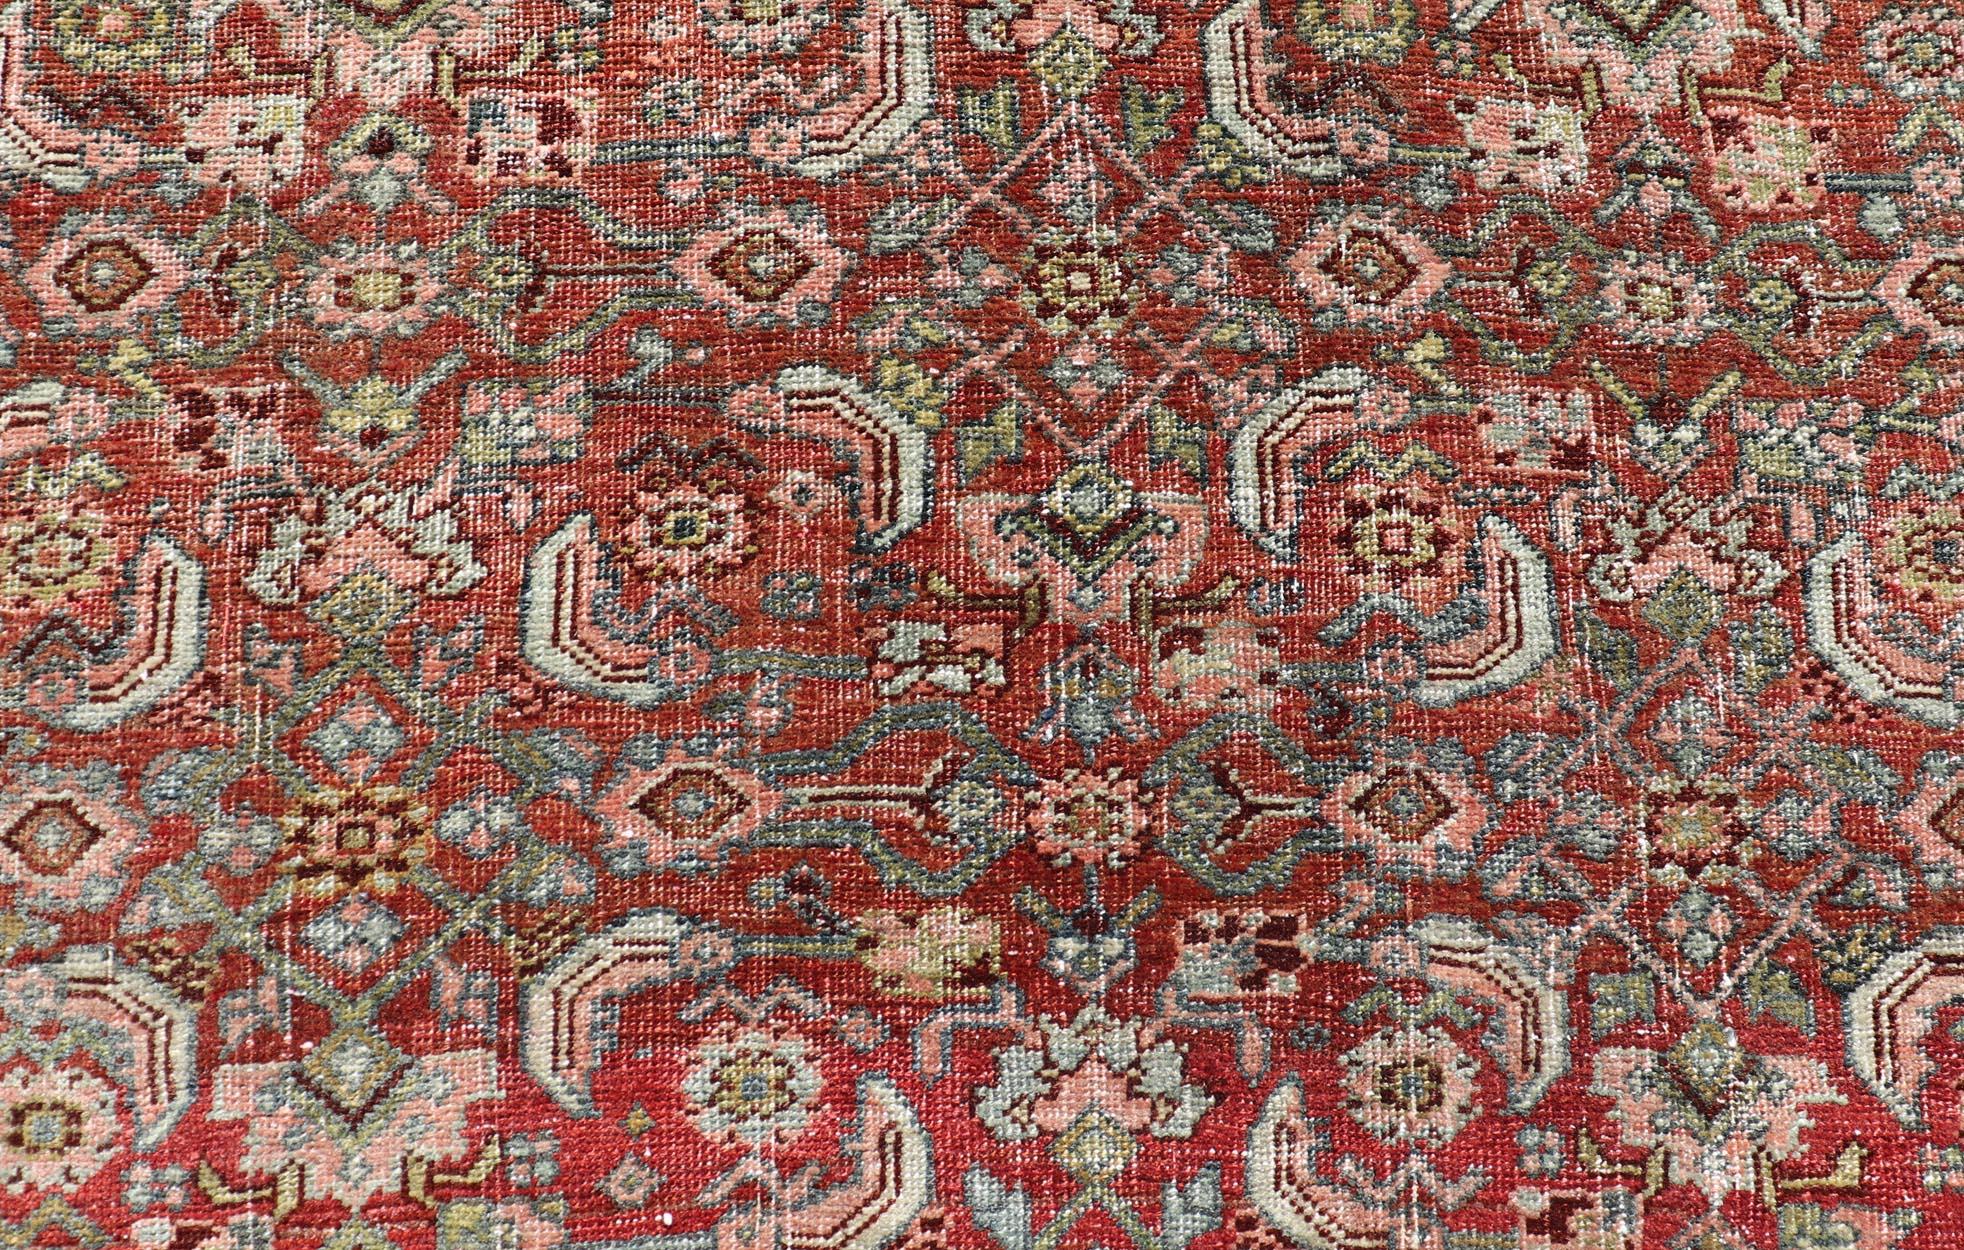 Palace Size Antique Persian Bidjar Rug in Shades of Red, Blue Grey & Lime Green For Sale 4